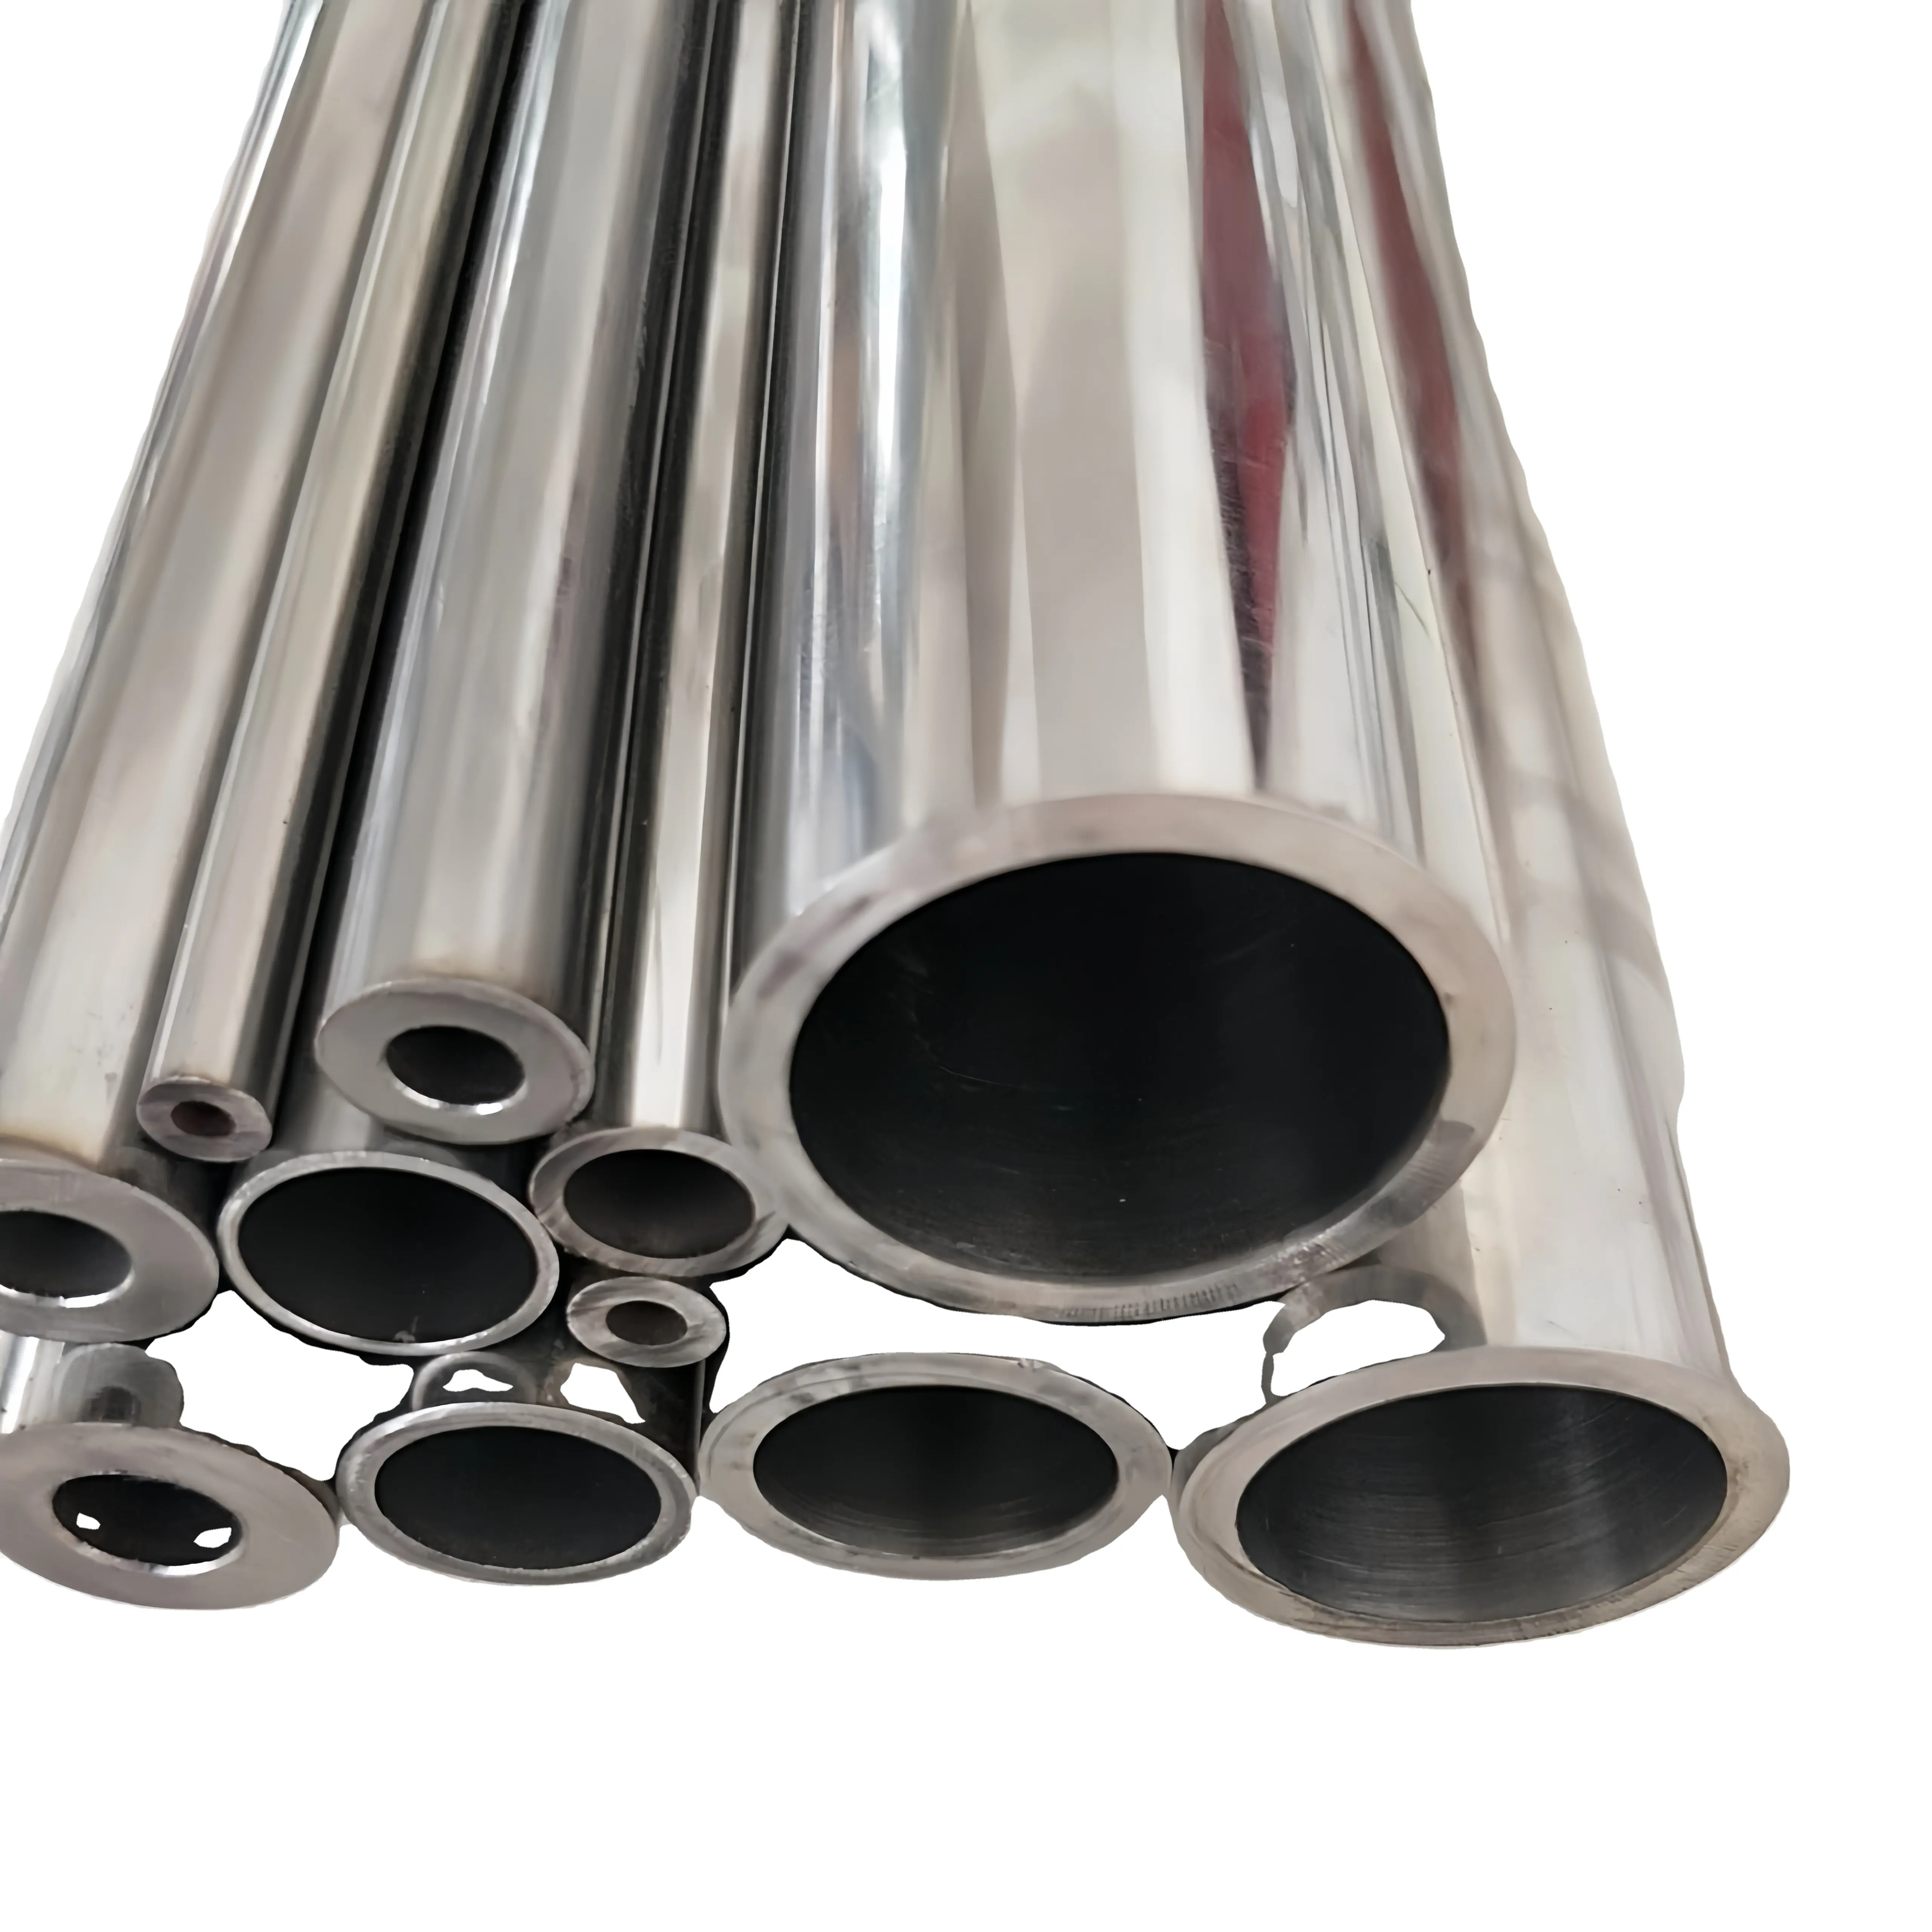 ASTM AISI 316 Seamless Stainless Steel Tubes 10mm-20mm Diameter Mirror Polished High Quality Building Material